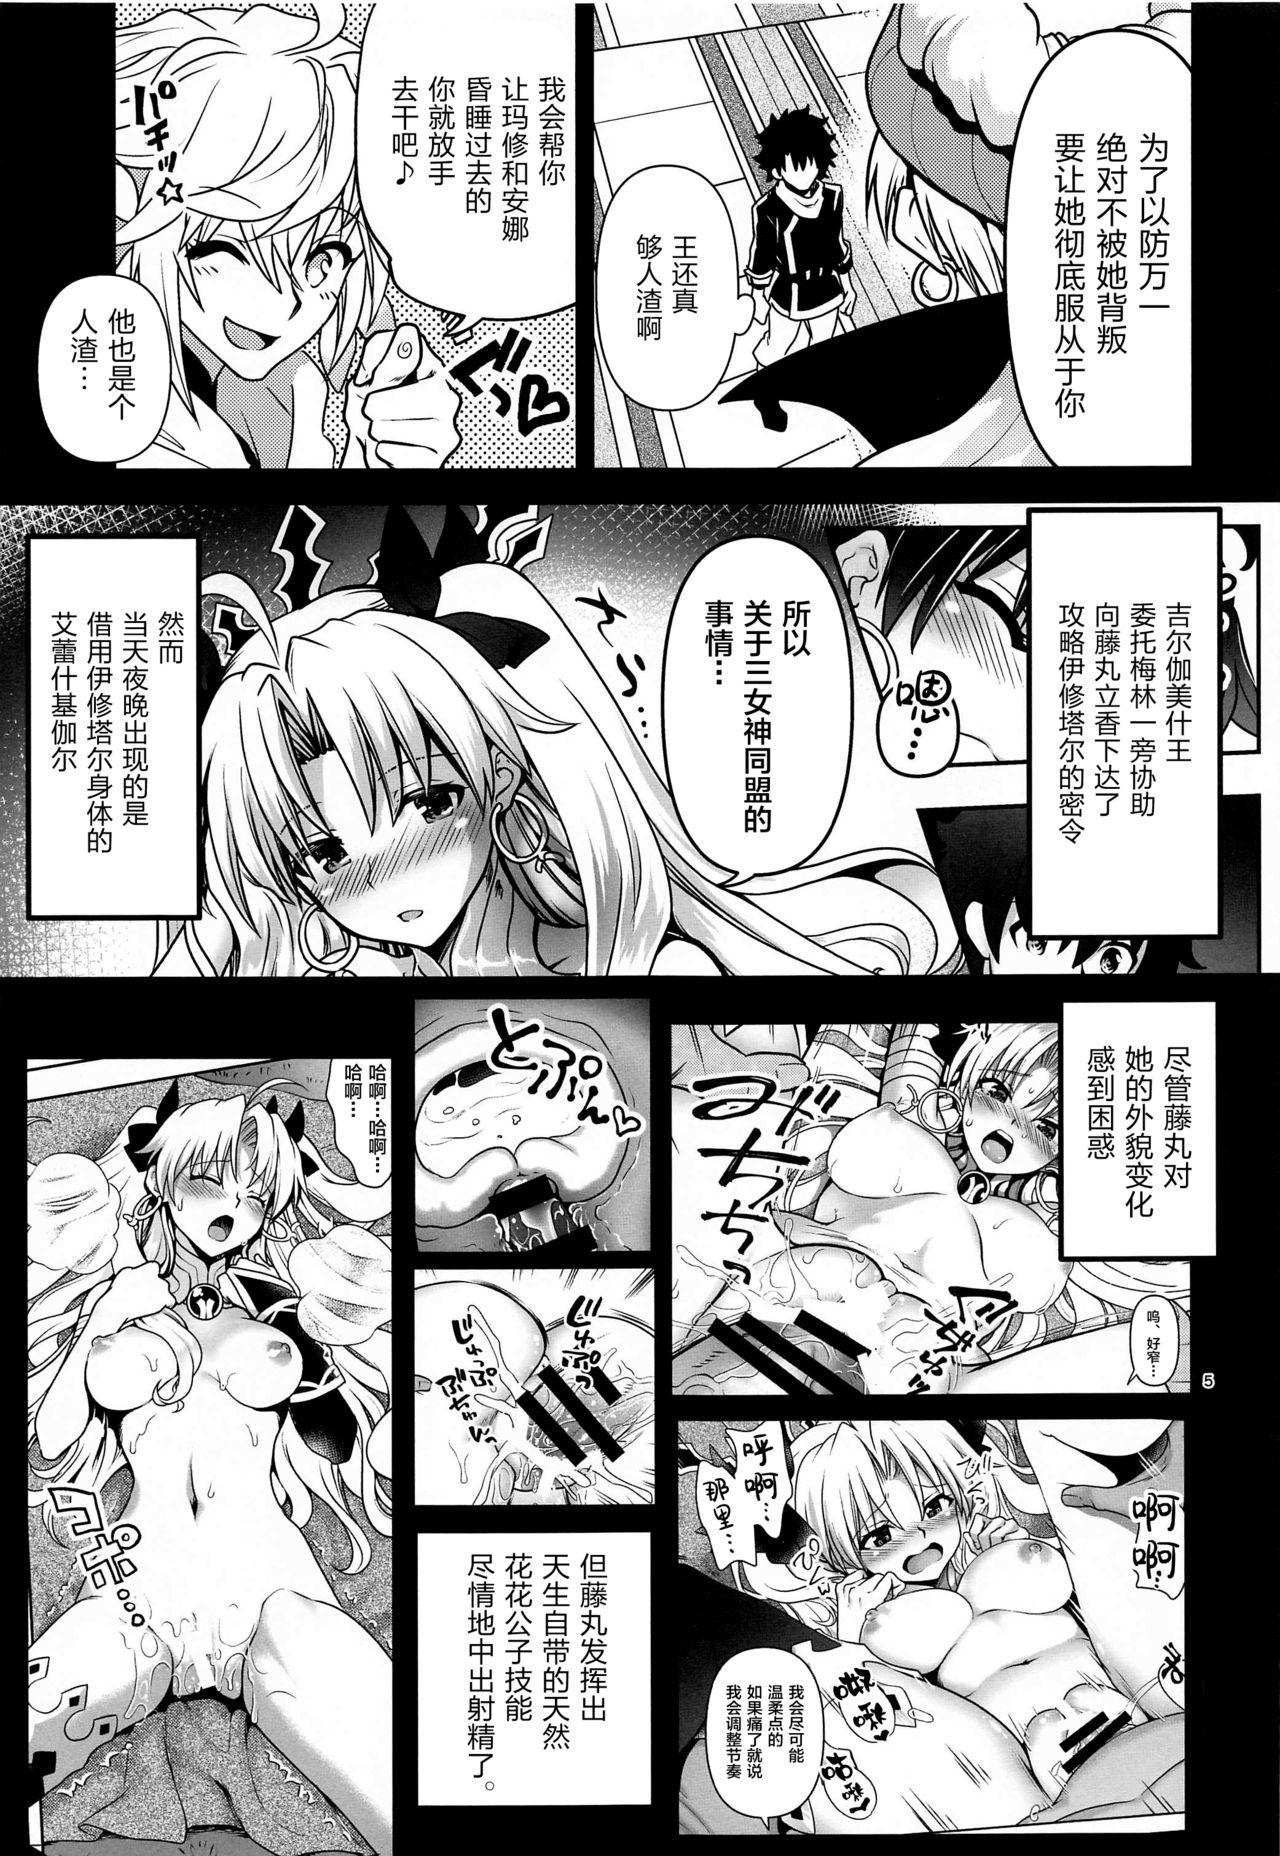 Chacal All Night Romance 2 - Fate grand order No Condom - Page 5